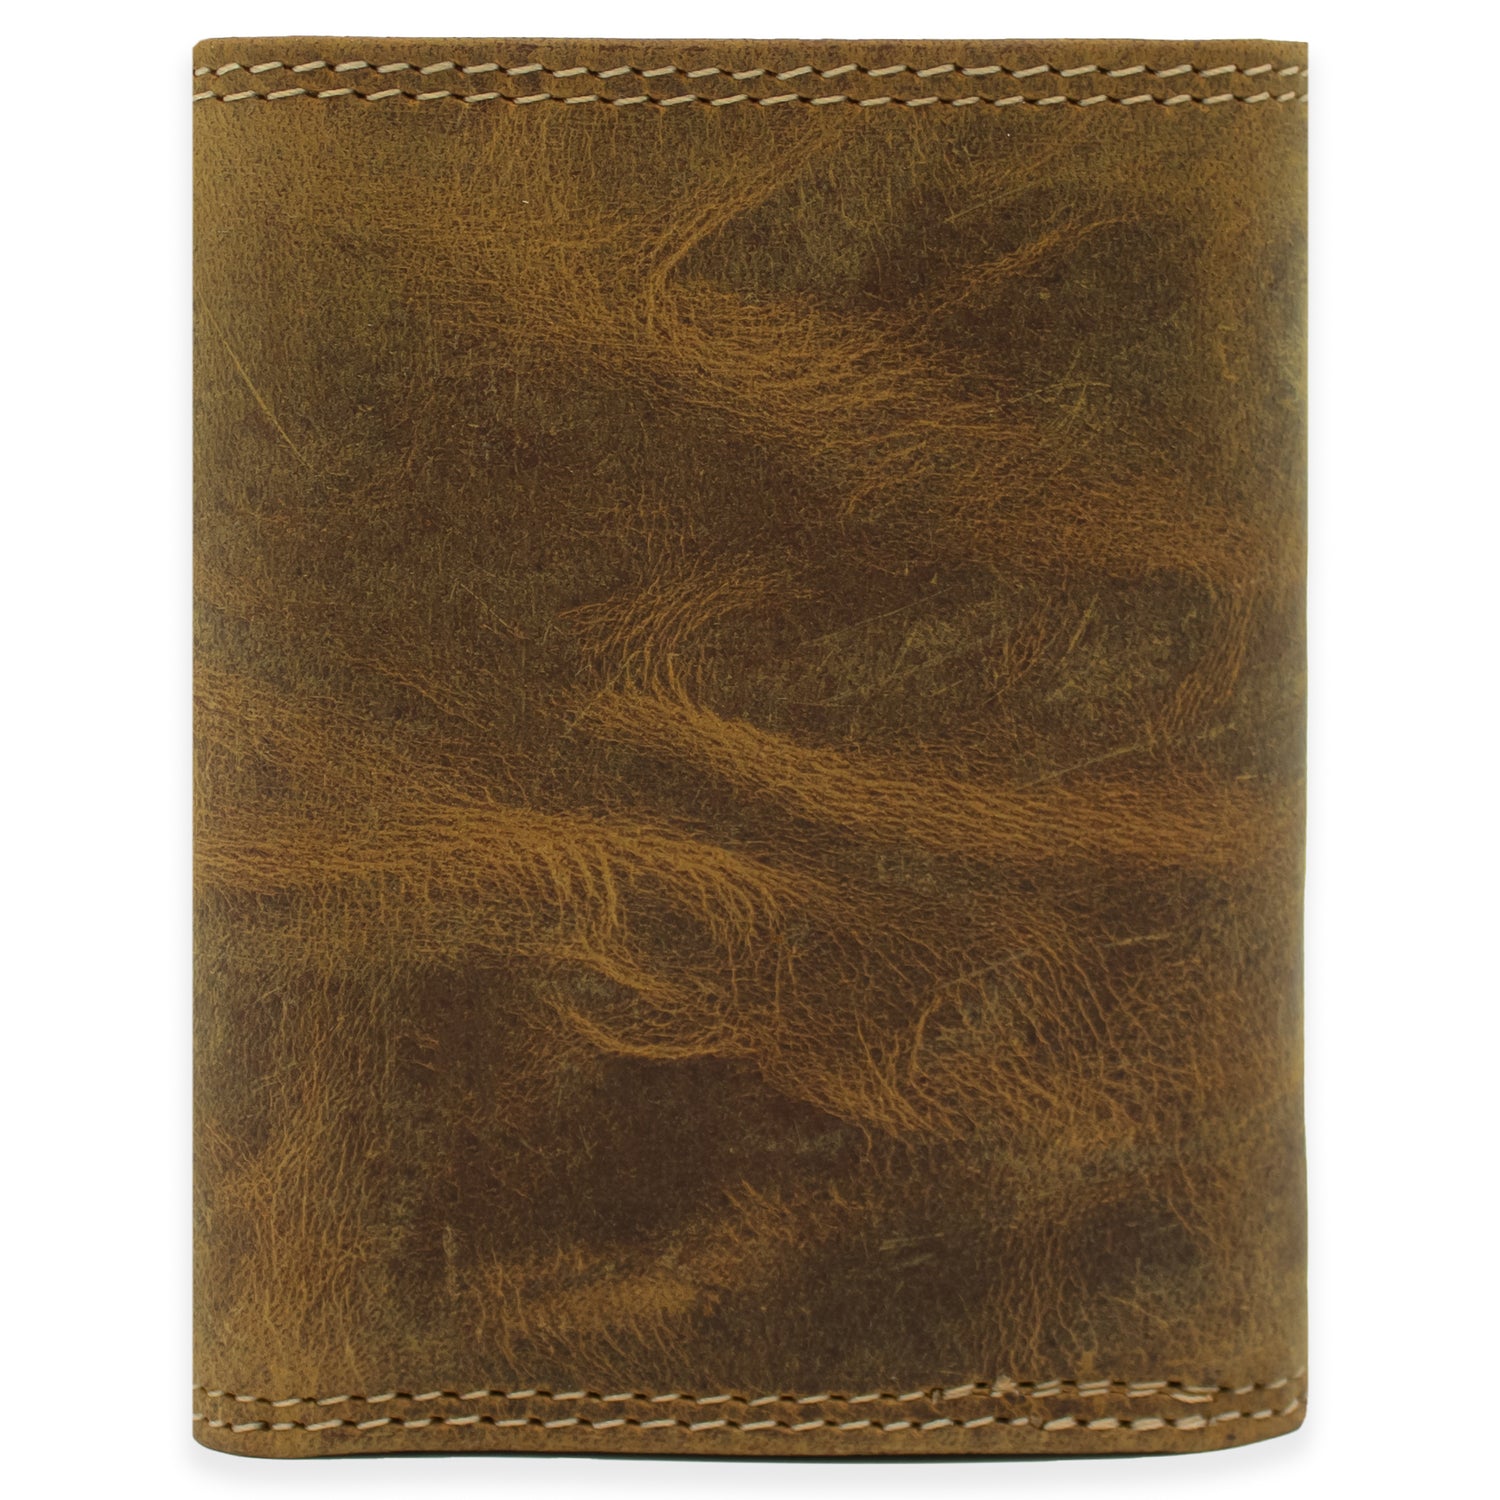 Texas A&M Trifold Conch Wallet